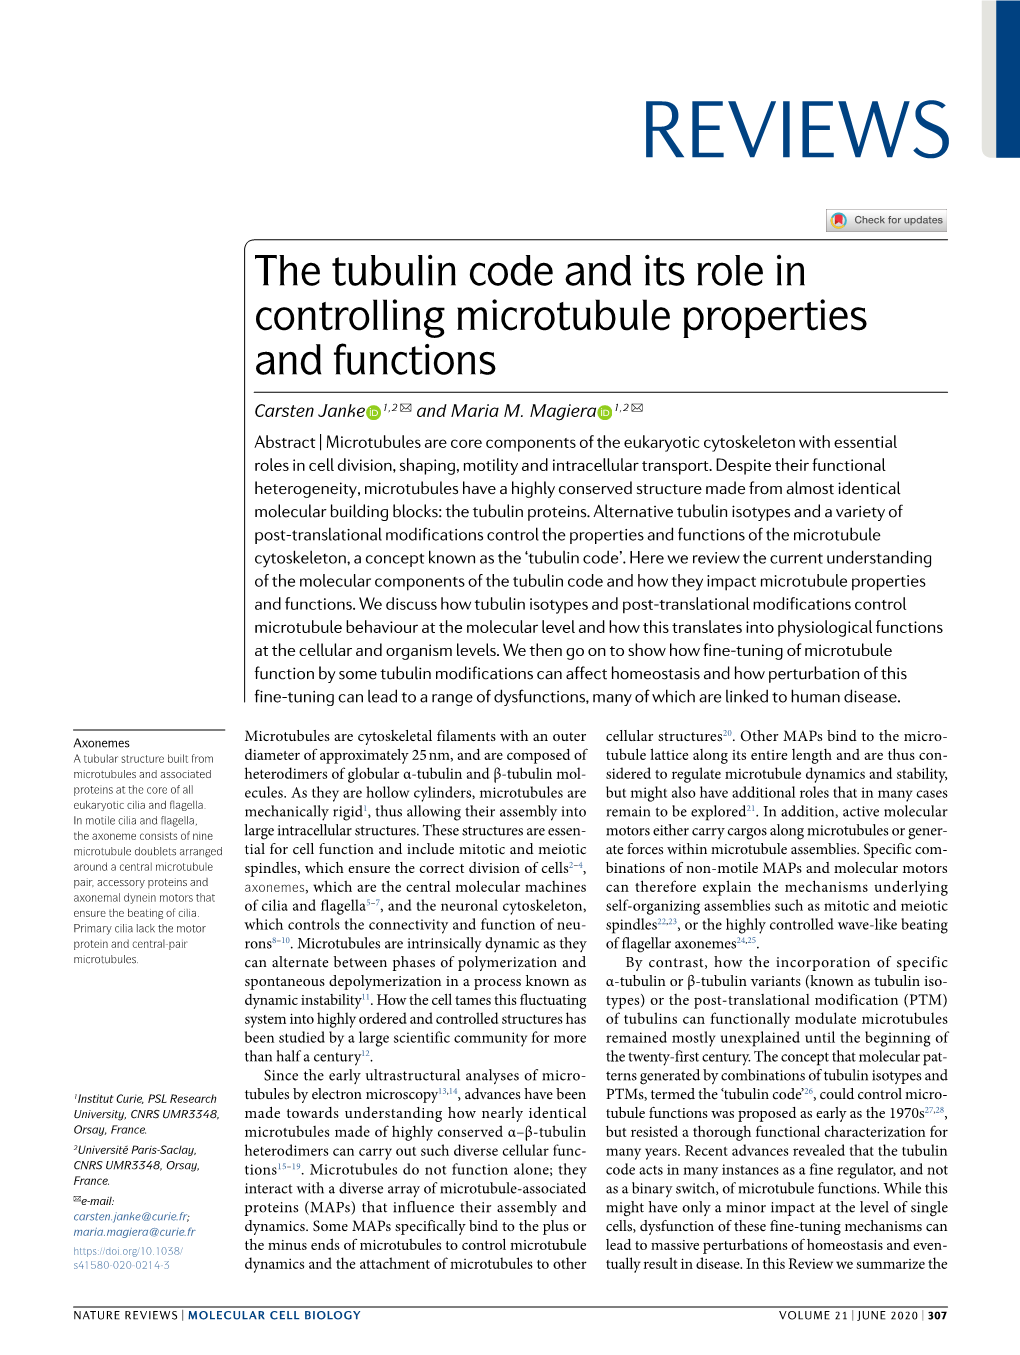 The Tubulin Code and Its Role in Controlling Microtubule Properties and Functions